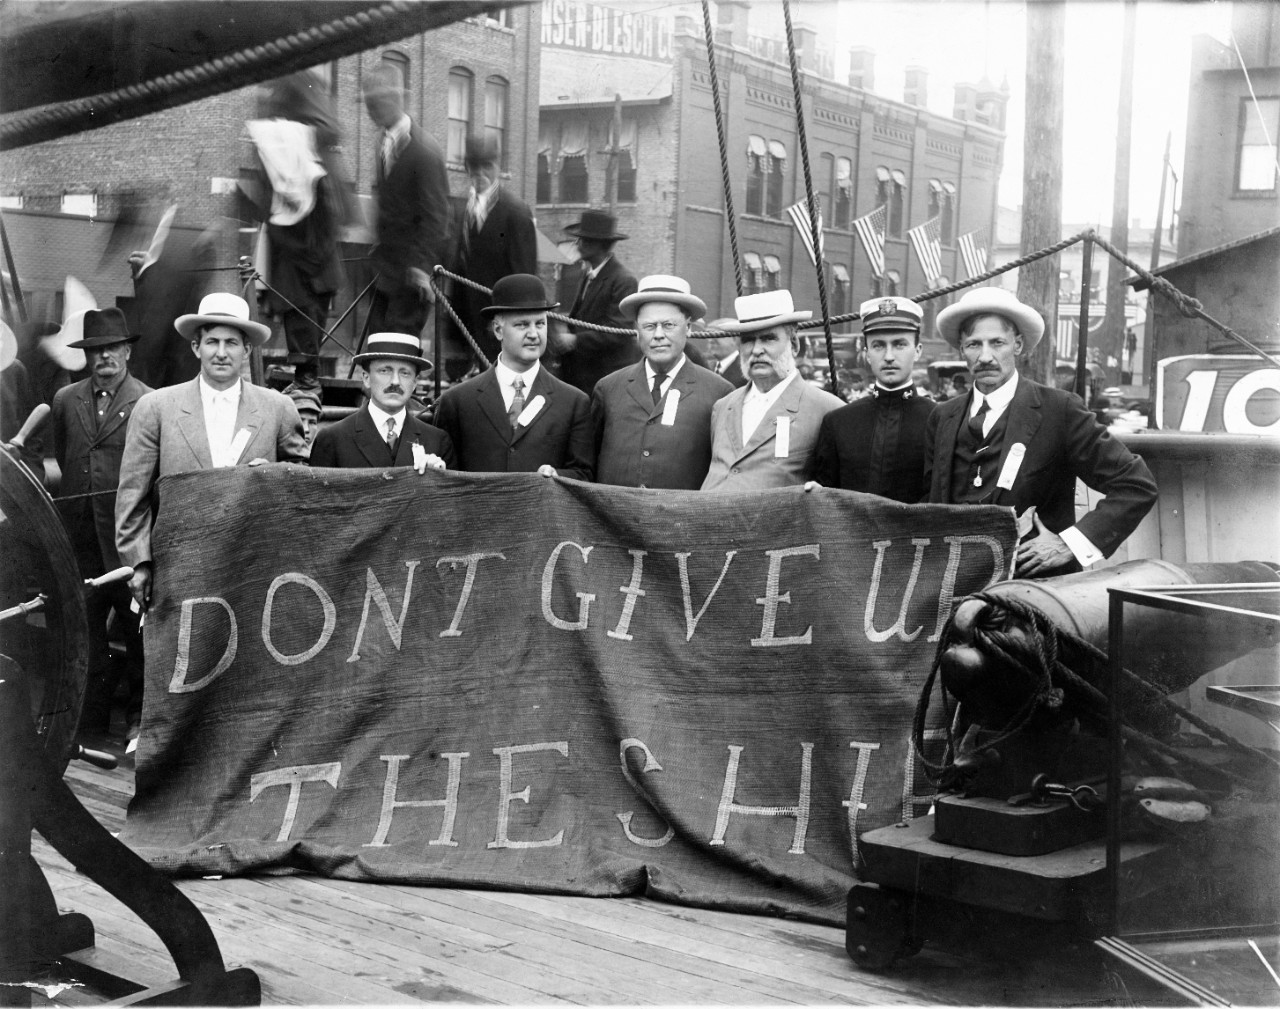 USS Niagra (1813-1816) "Don't Give Up The Ship" banner.